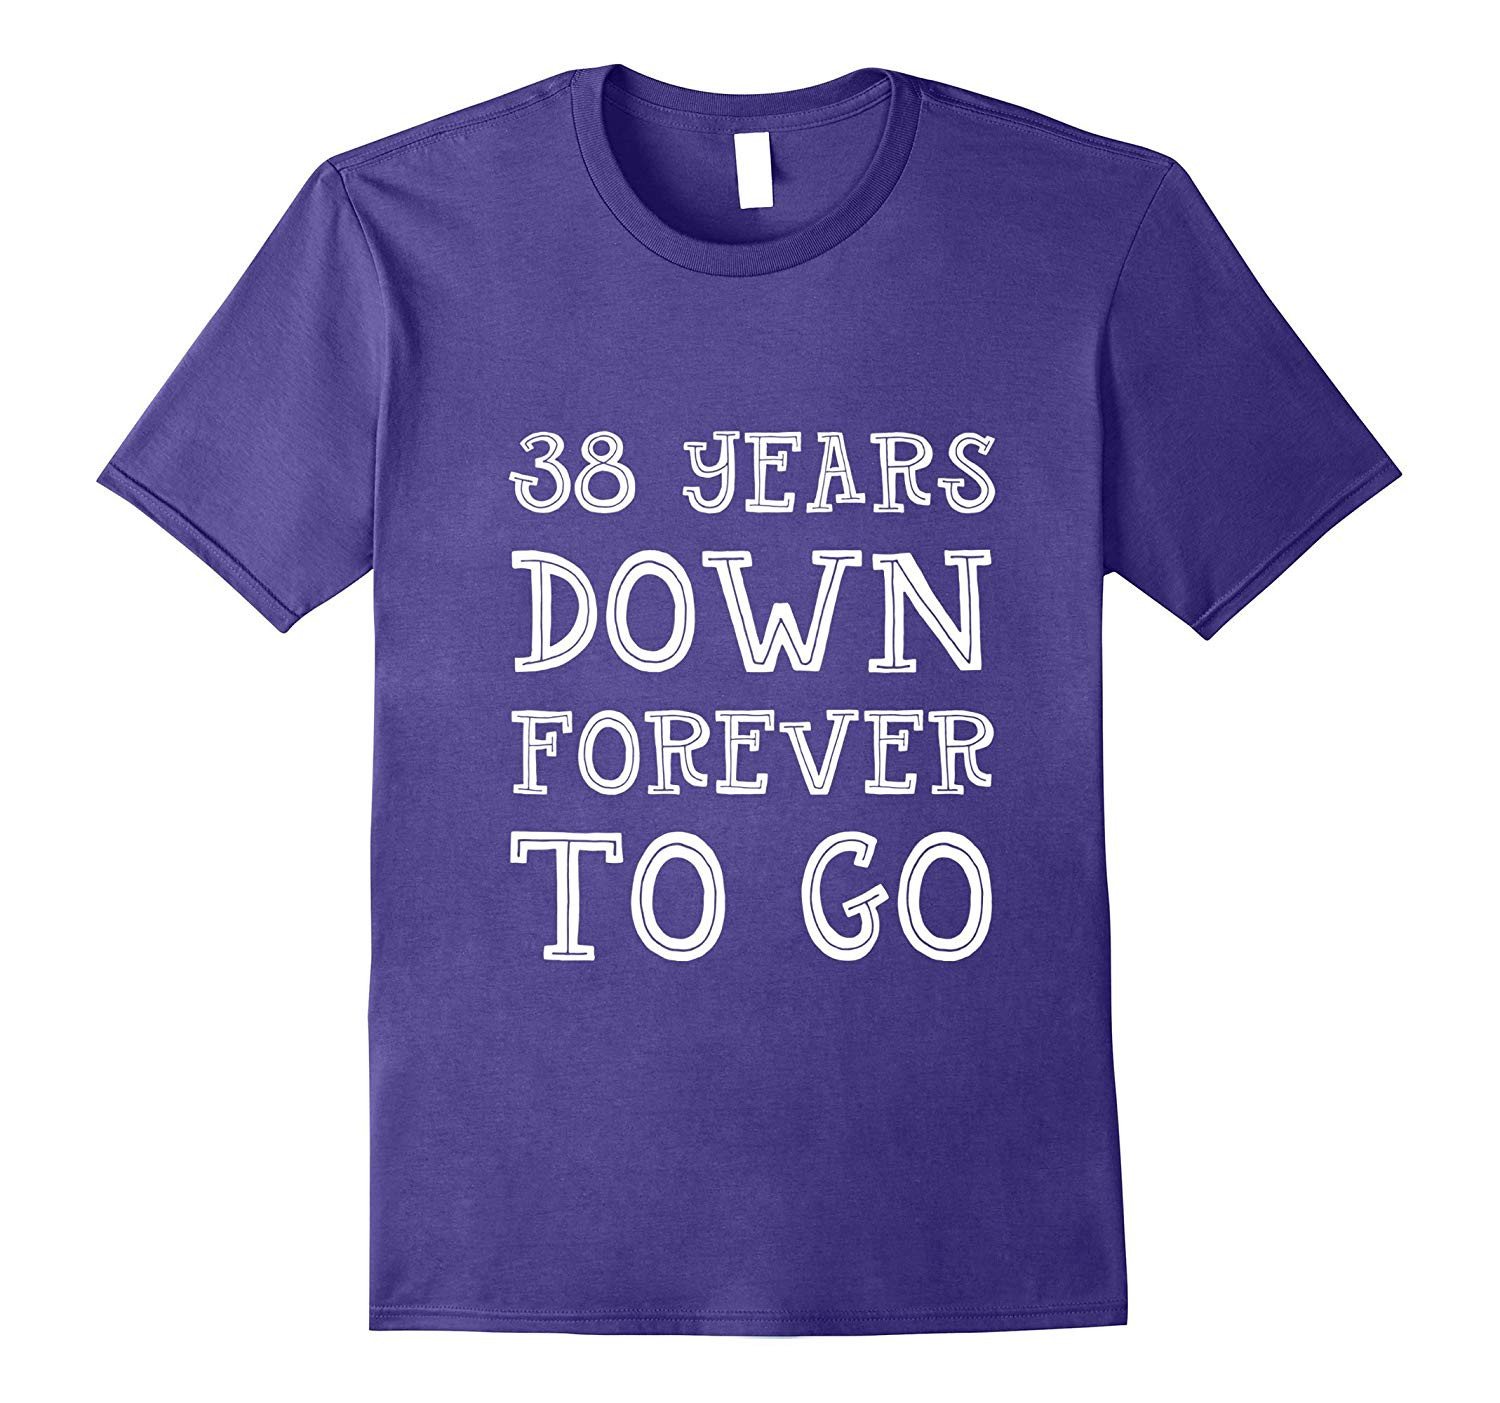 38Th Wedding Anniversary Gift Ideas
 38th Wedding Anniversary Gift 38 Years Down Forever To Go